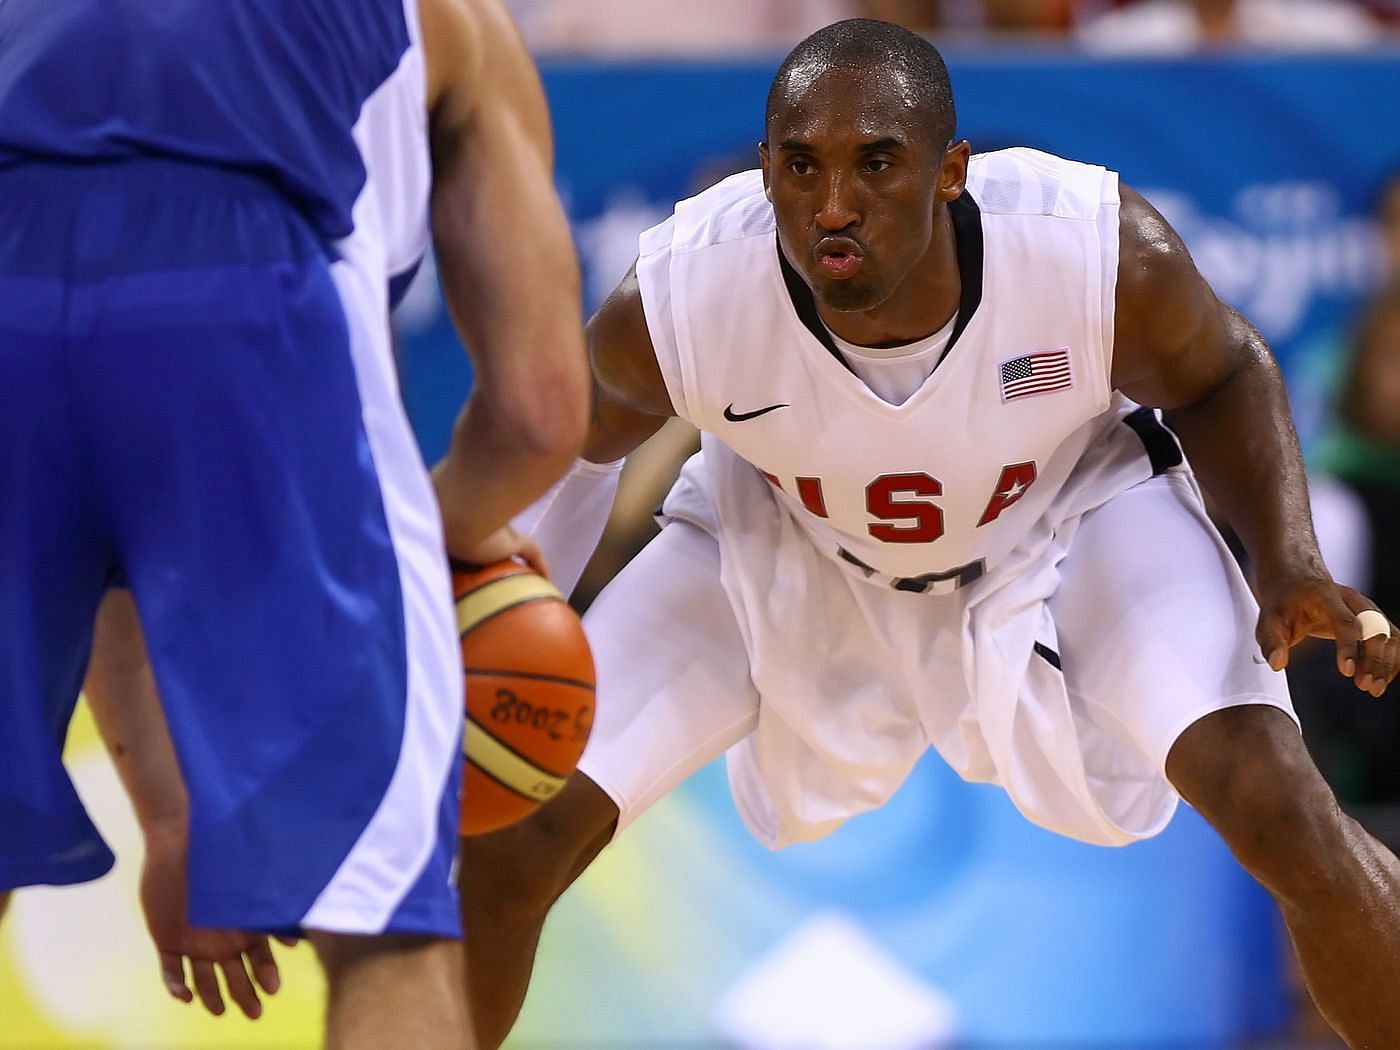 You'd Better Fix That Motherf*cker': LeBron Was Heated About Kobe's Shot  Selection on Team USA